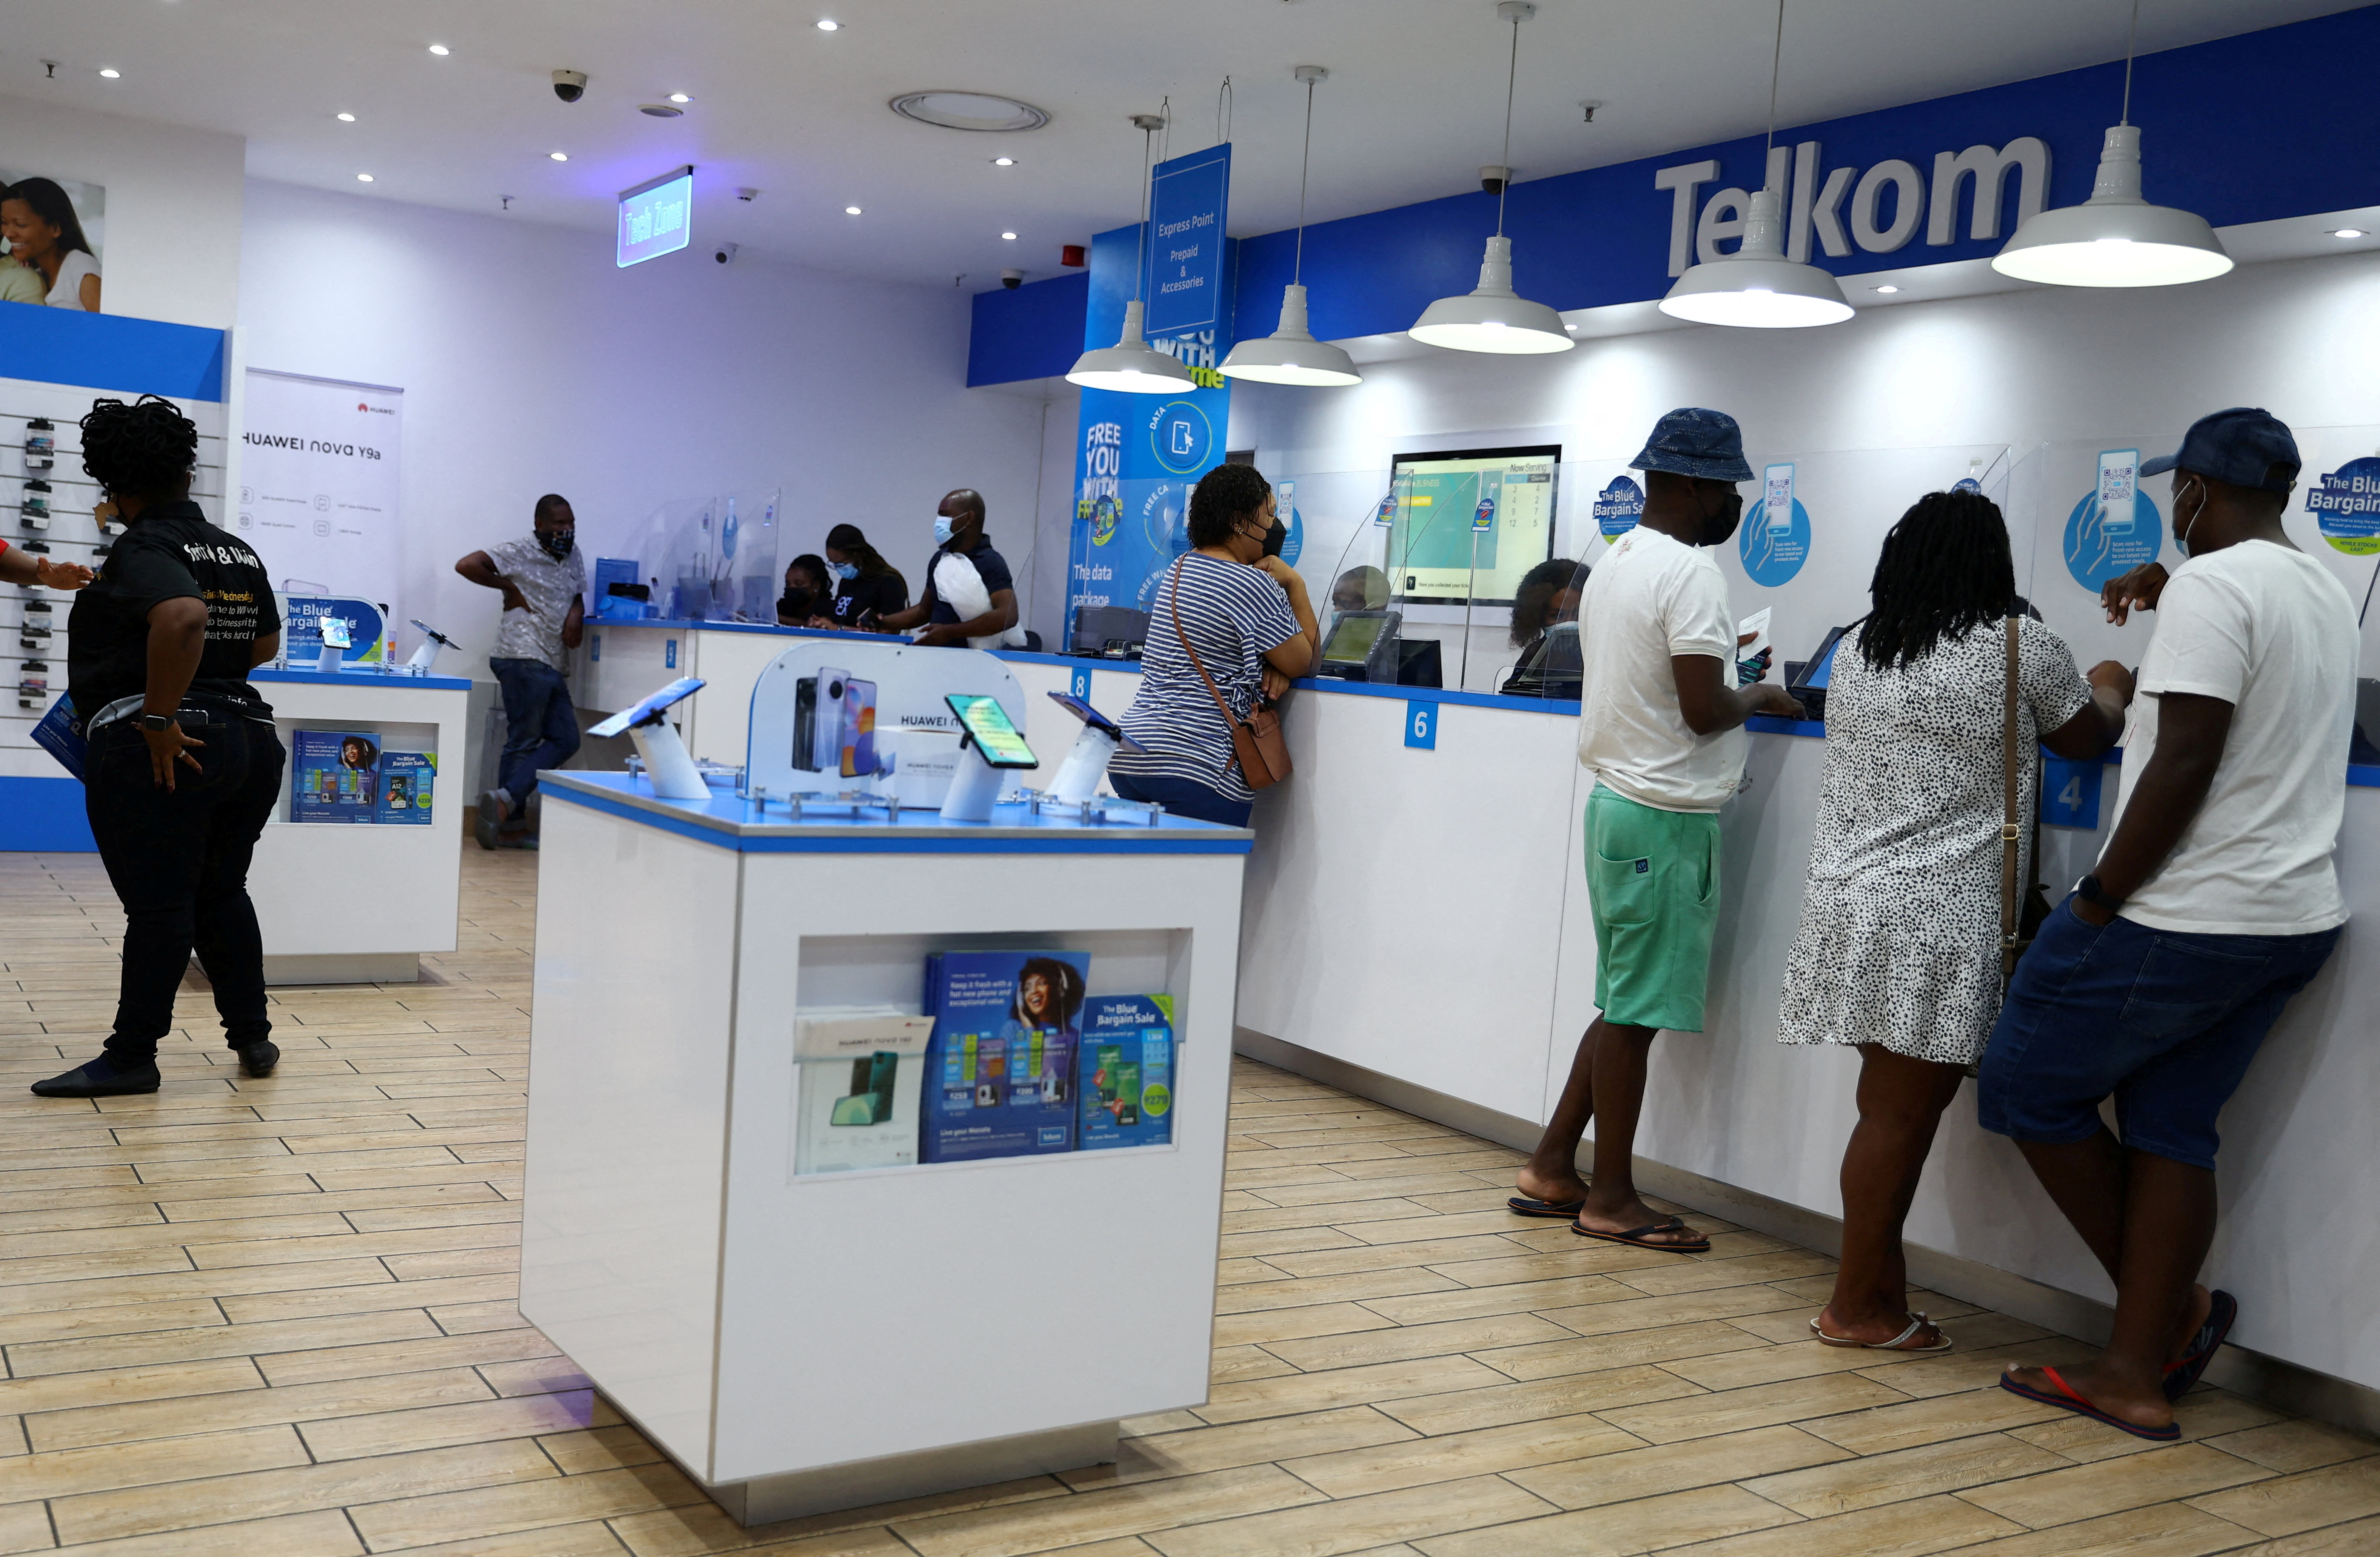 Customers are served at a branch of South Africa's mobile operator, Telkom, in Johannesburg